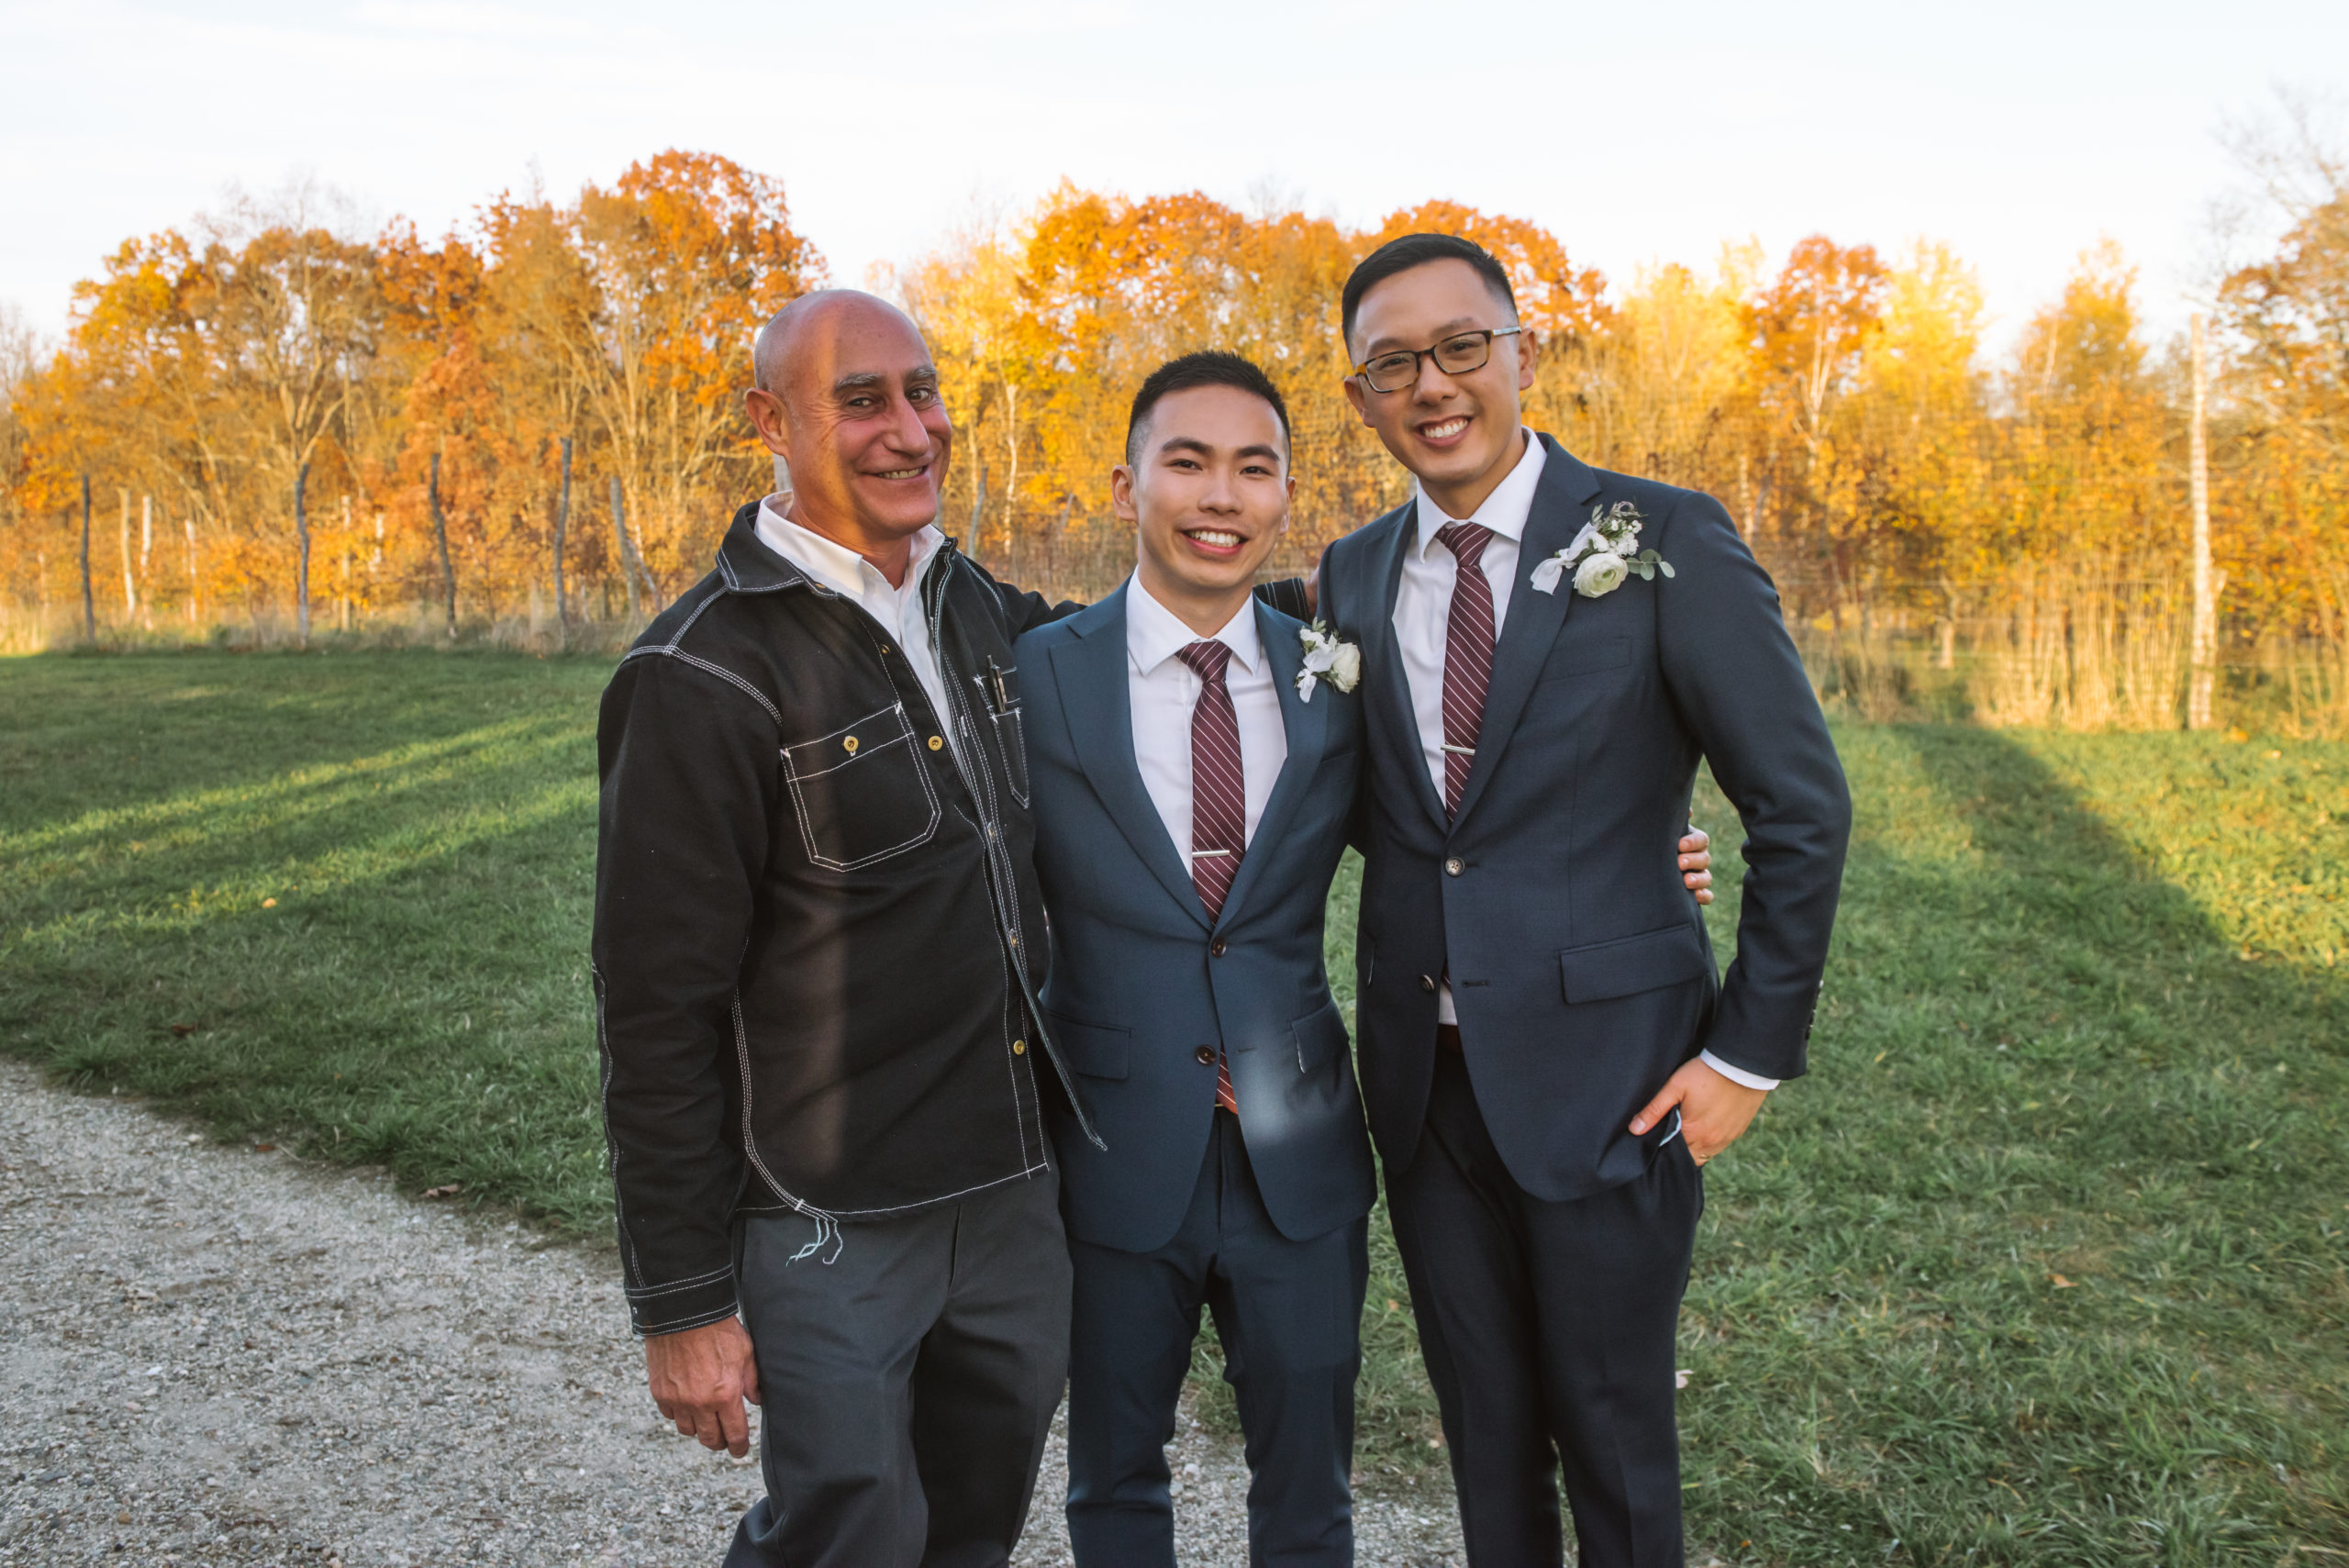 Two grooms standing side by side with their wedding planner. They all have their arms around one another and are smiling directly to the camera. There are autumnal trees in the background.